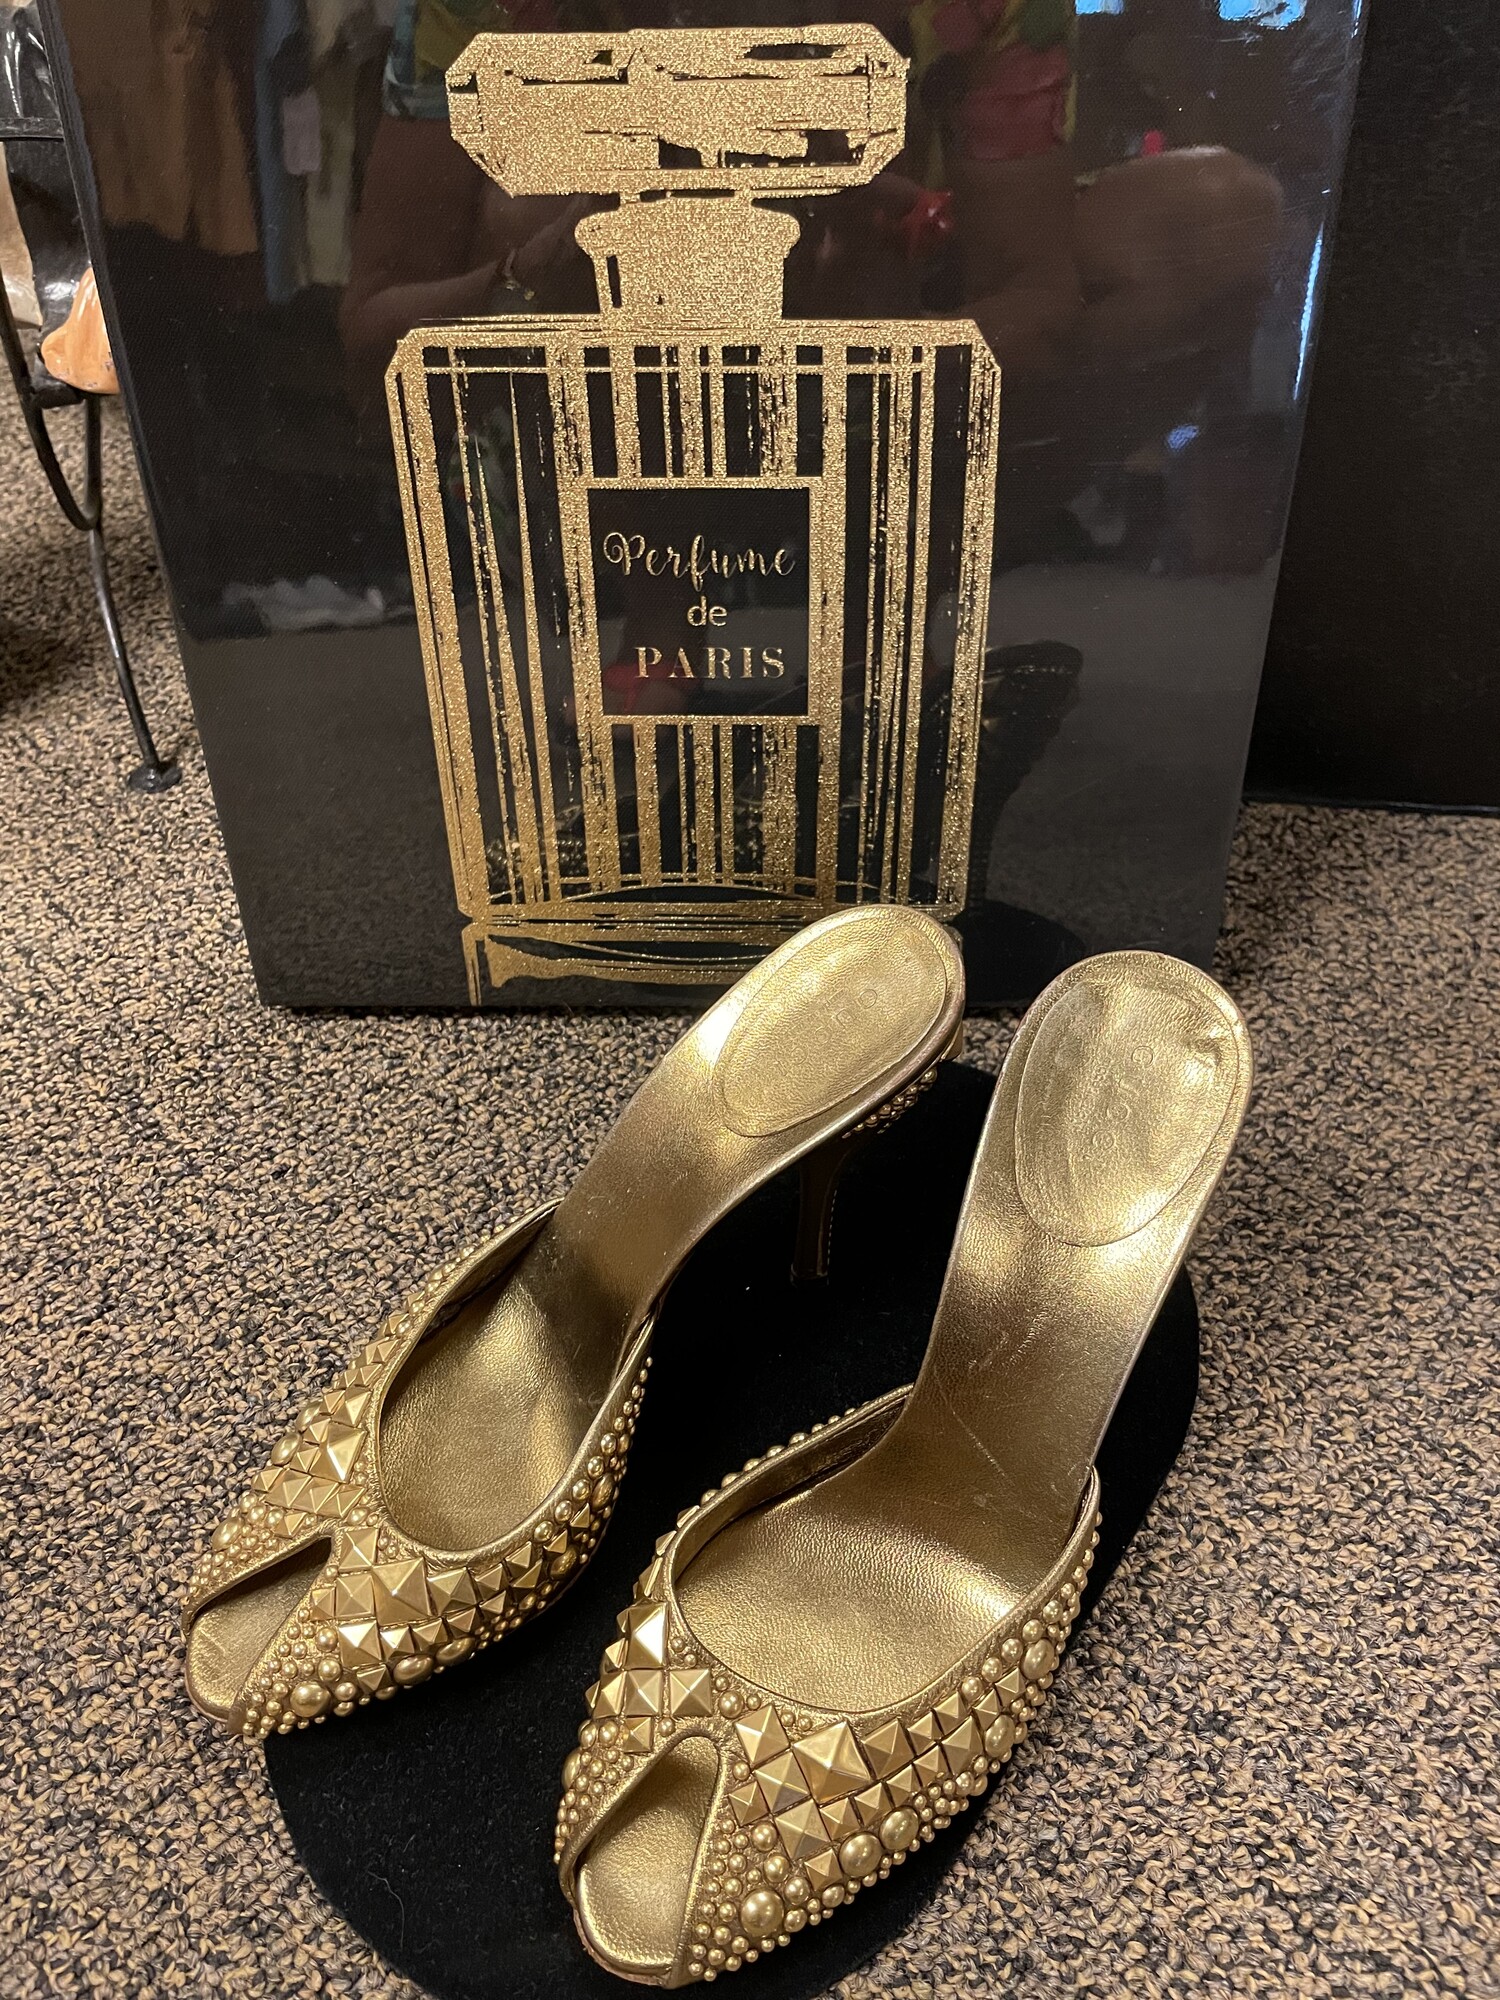 Gucci Studded Runway Heels, Bronze, Size: 8M.  Unique & fabulous heels. There's no other words to describe:)  Selling elsewhere for $799. & $1200.  True bargain.